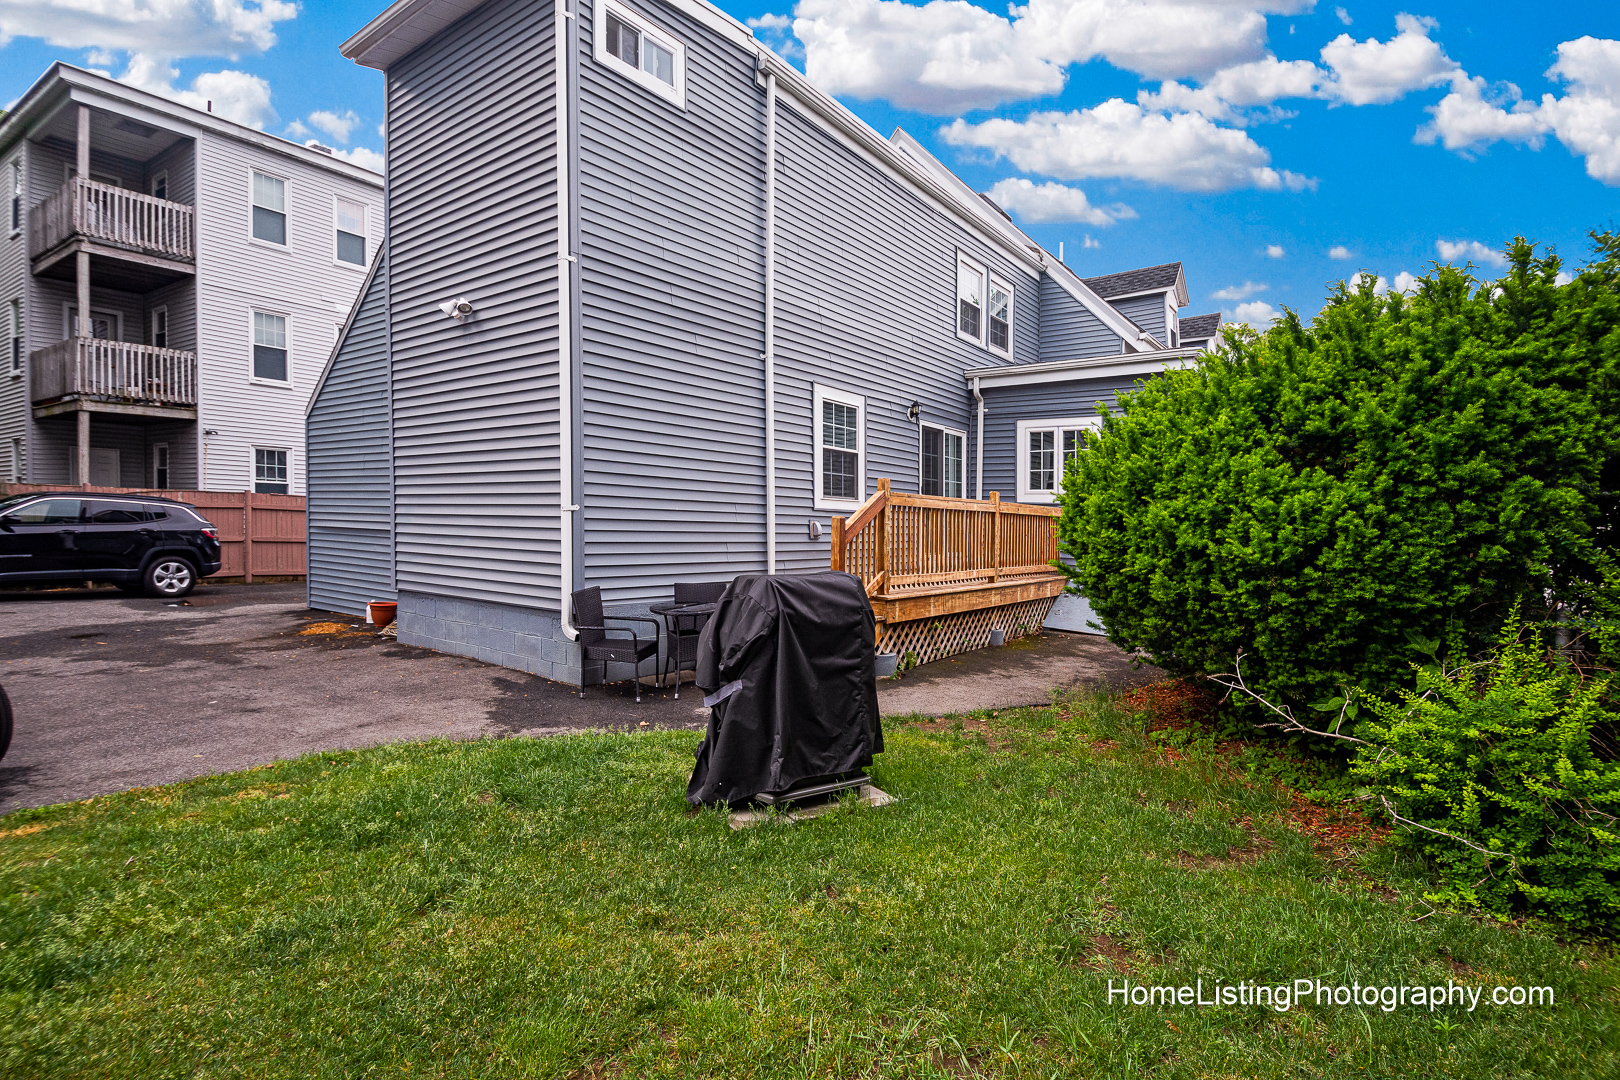 Thomas Adach - Medford MA professional real estate photographer - 508-655-2225 Home Listing Photography